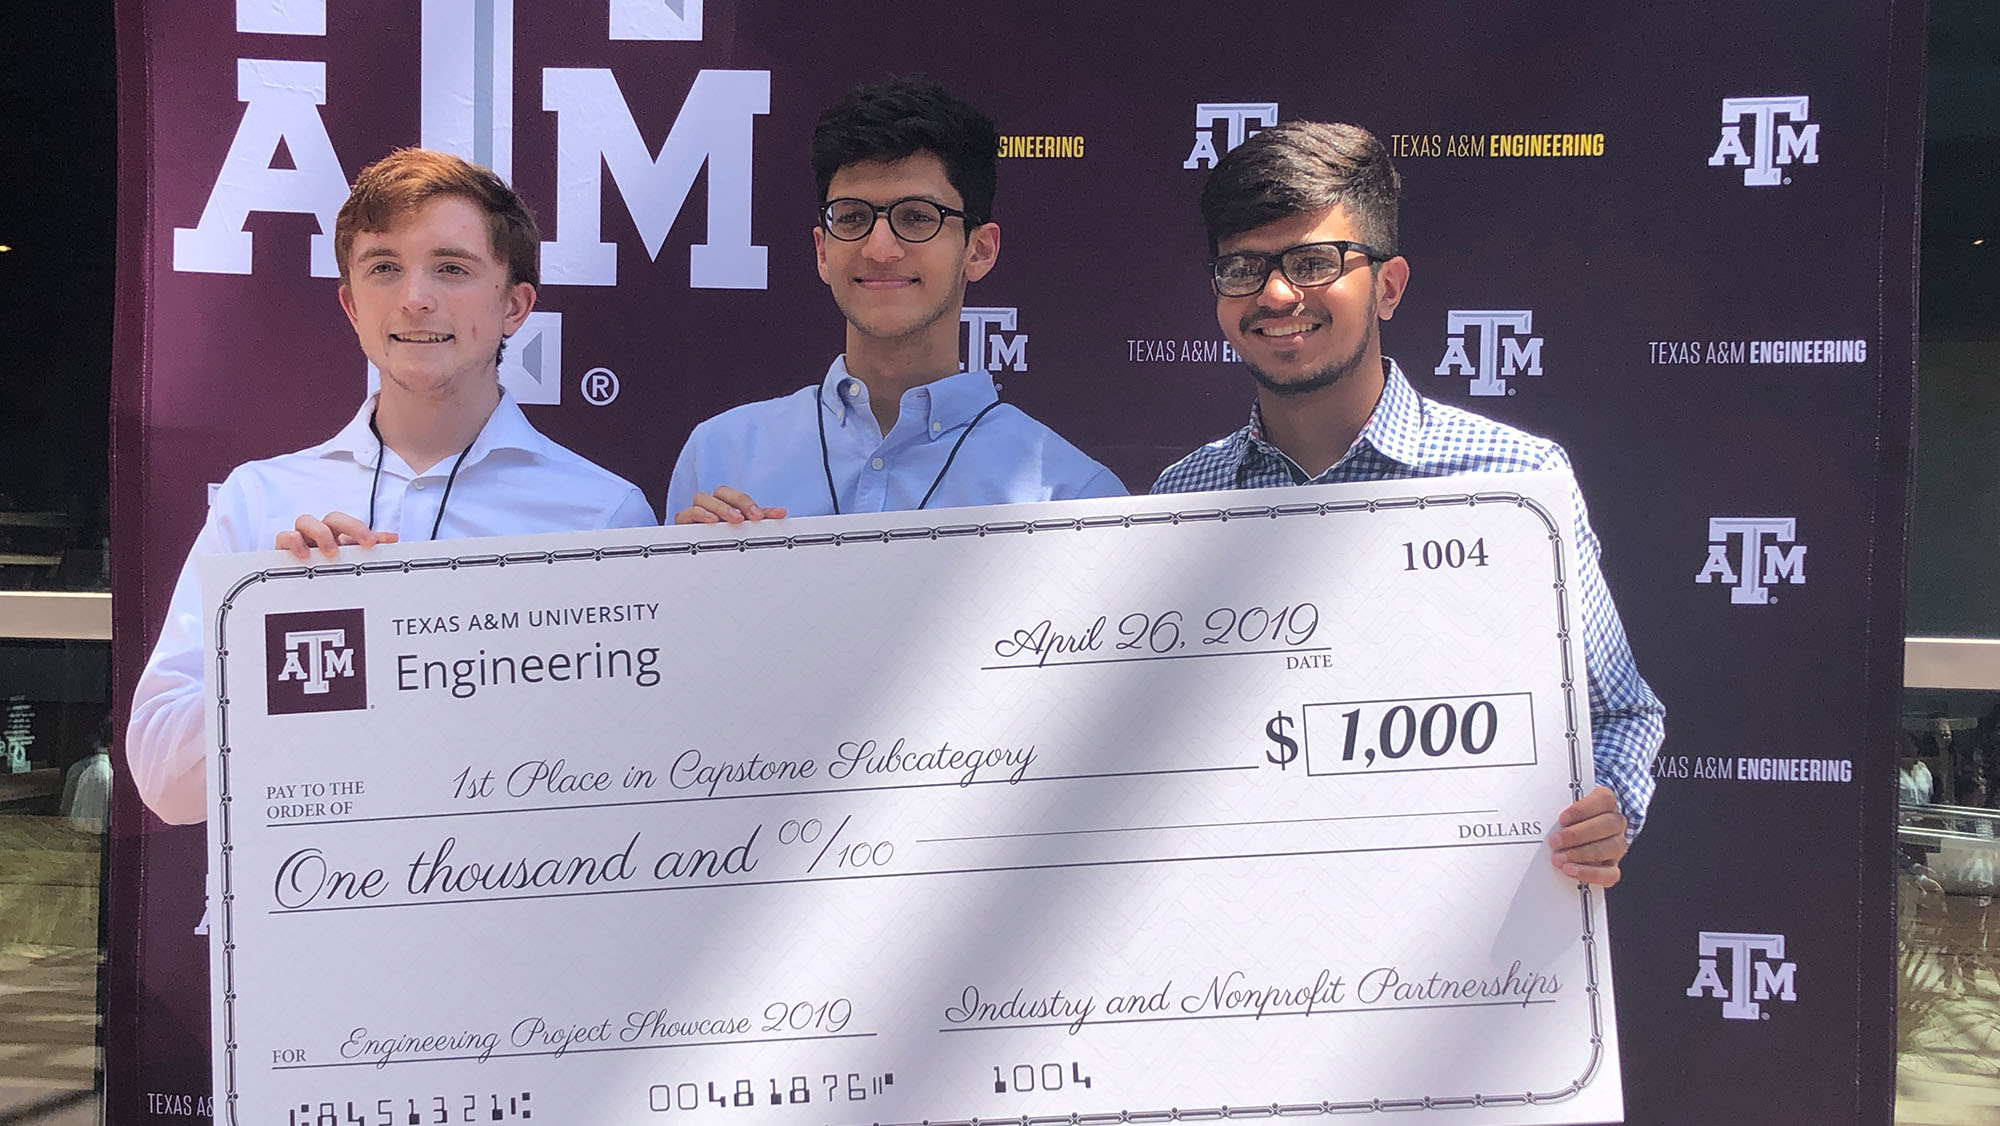 Team members pose in front of a maroon Texas A&M backdrop after being awarded a check for their research project.